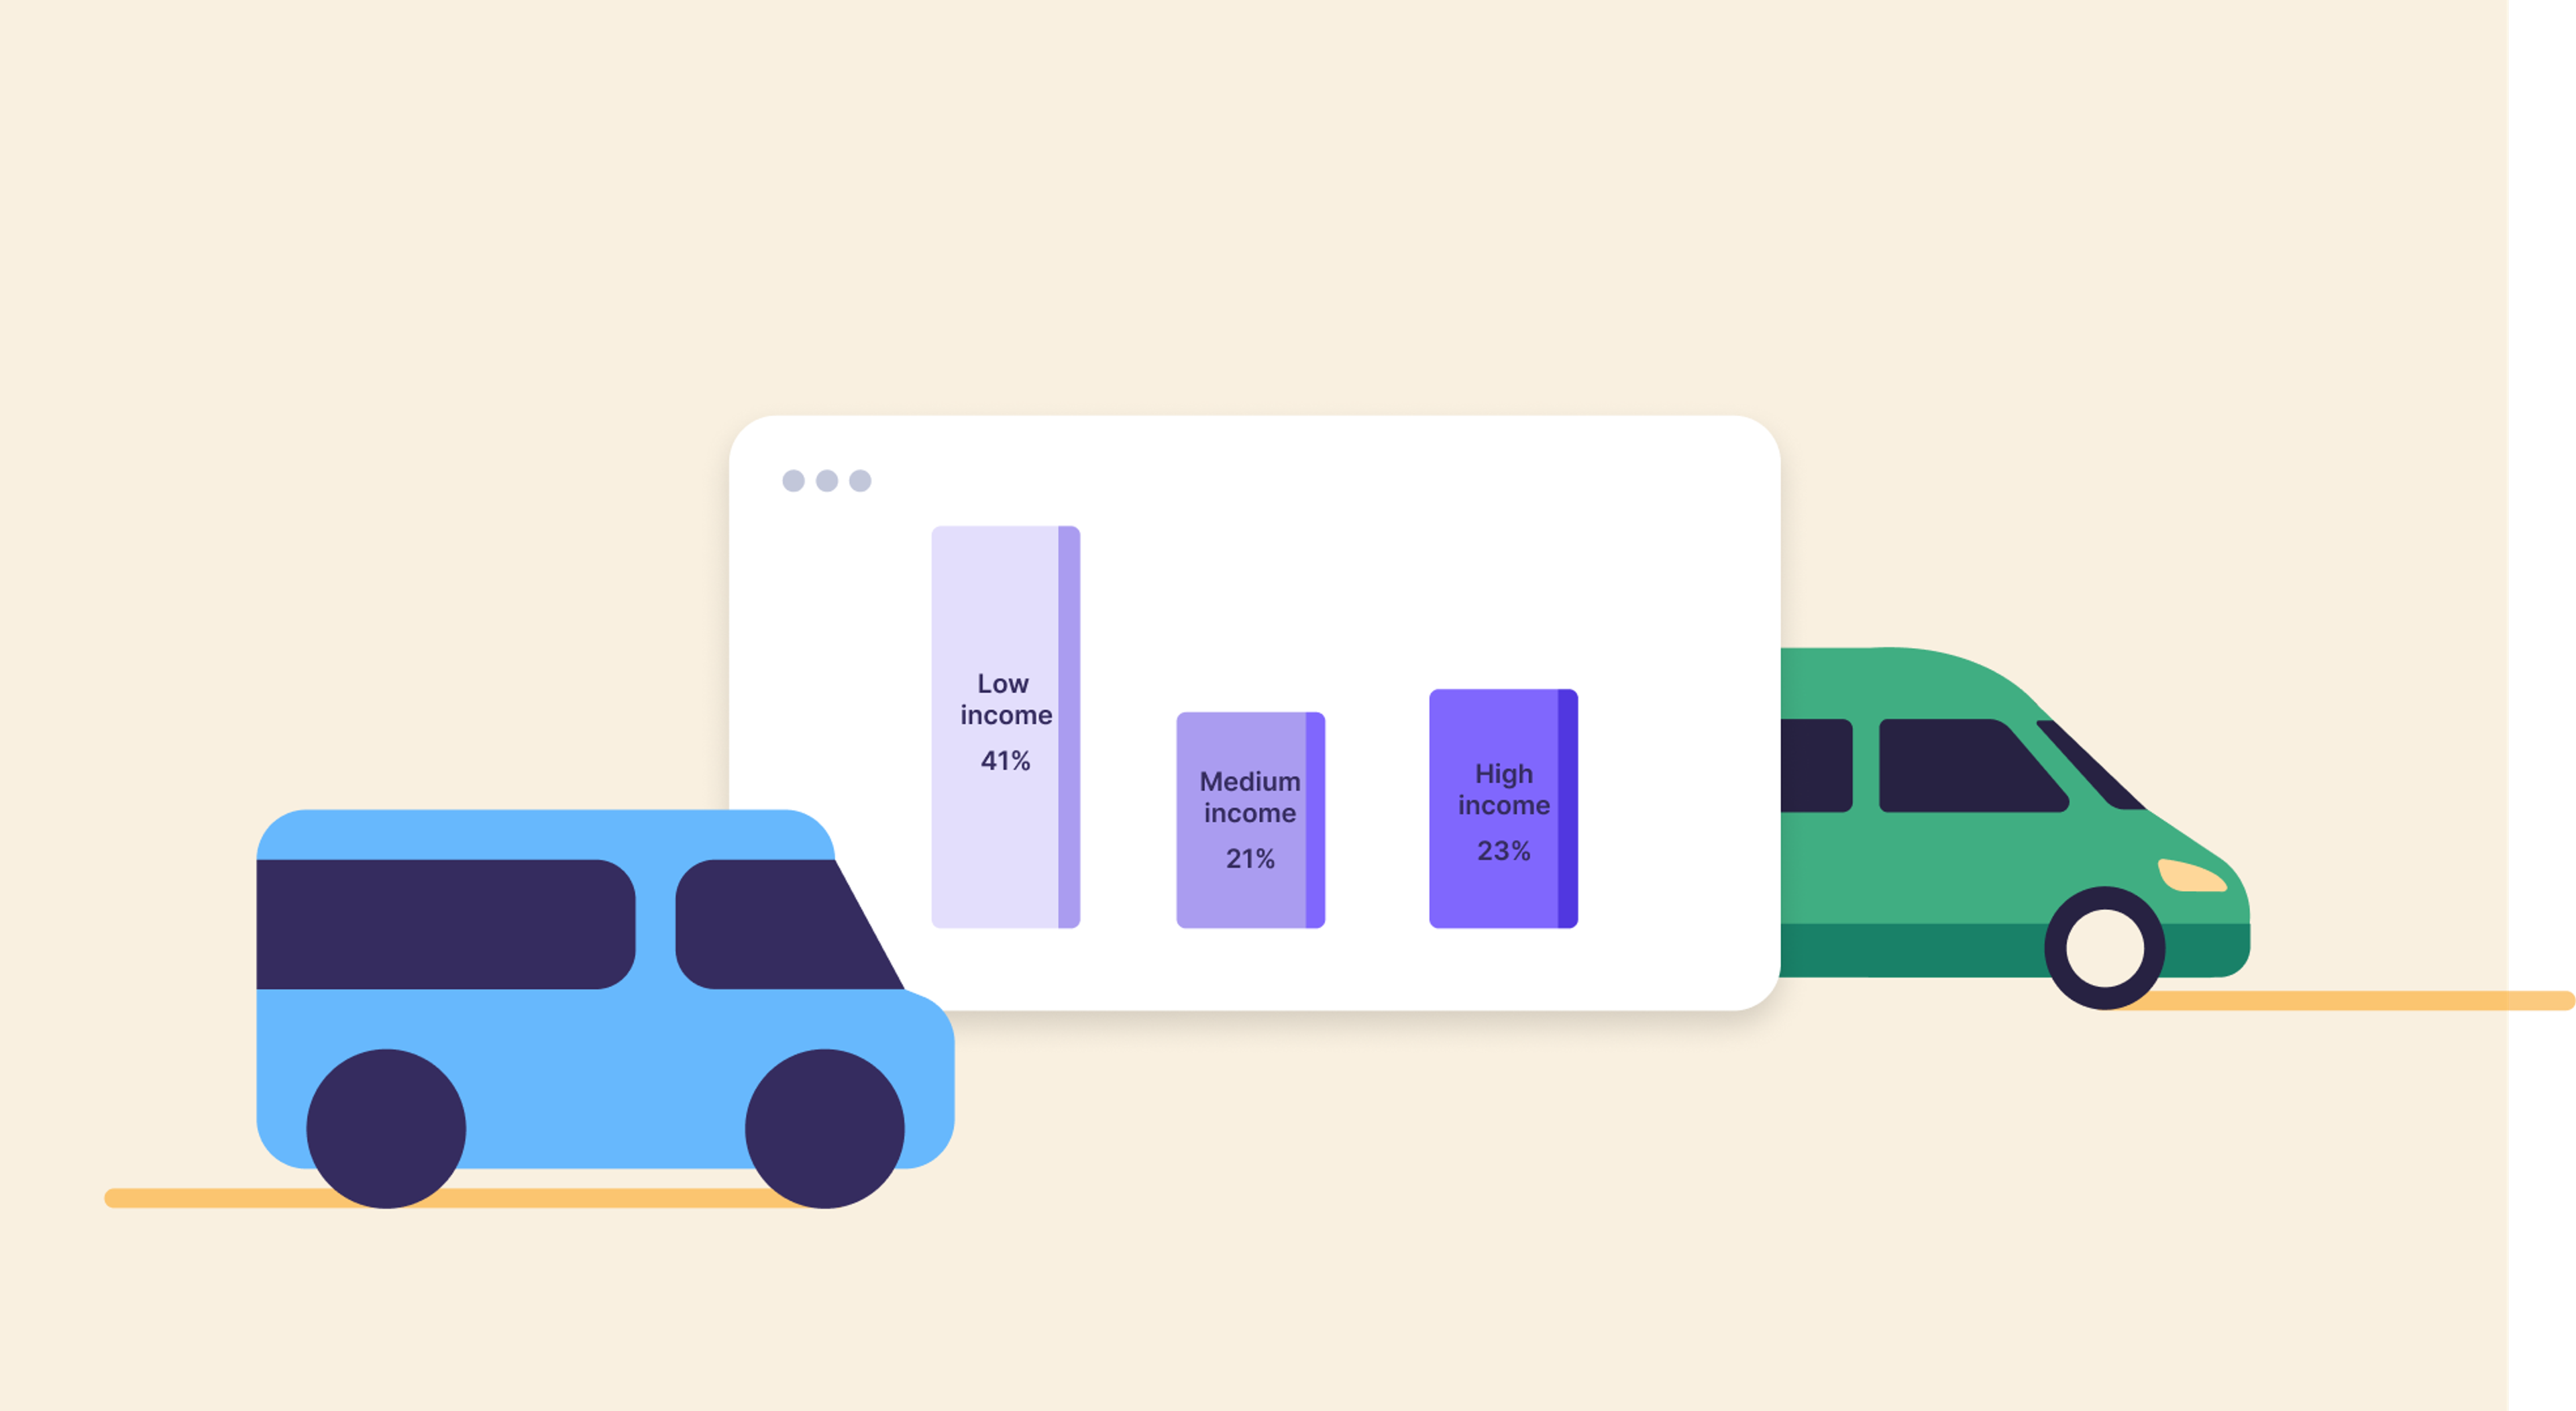 Modal split - income and on-demand transit